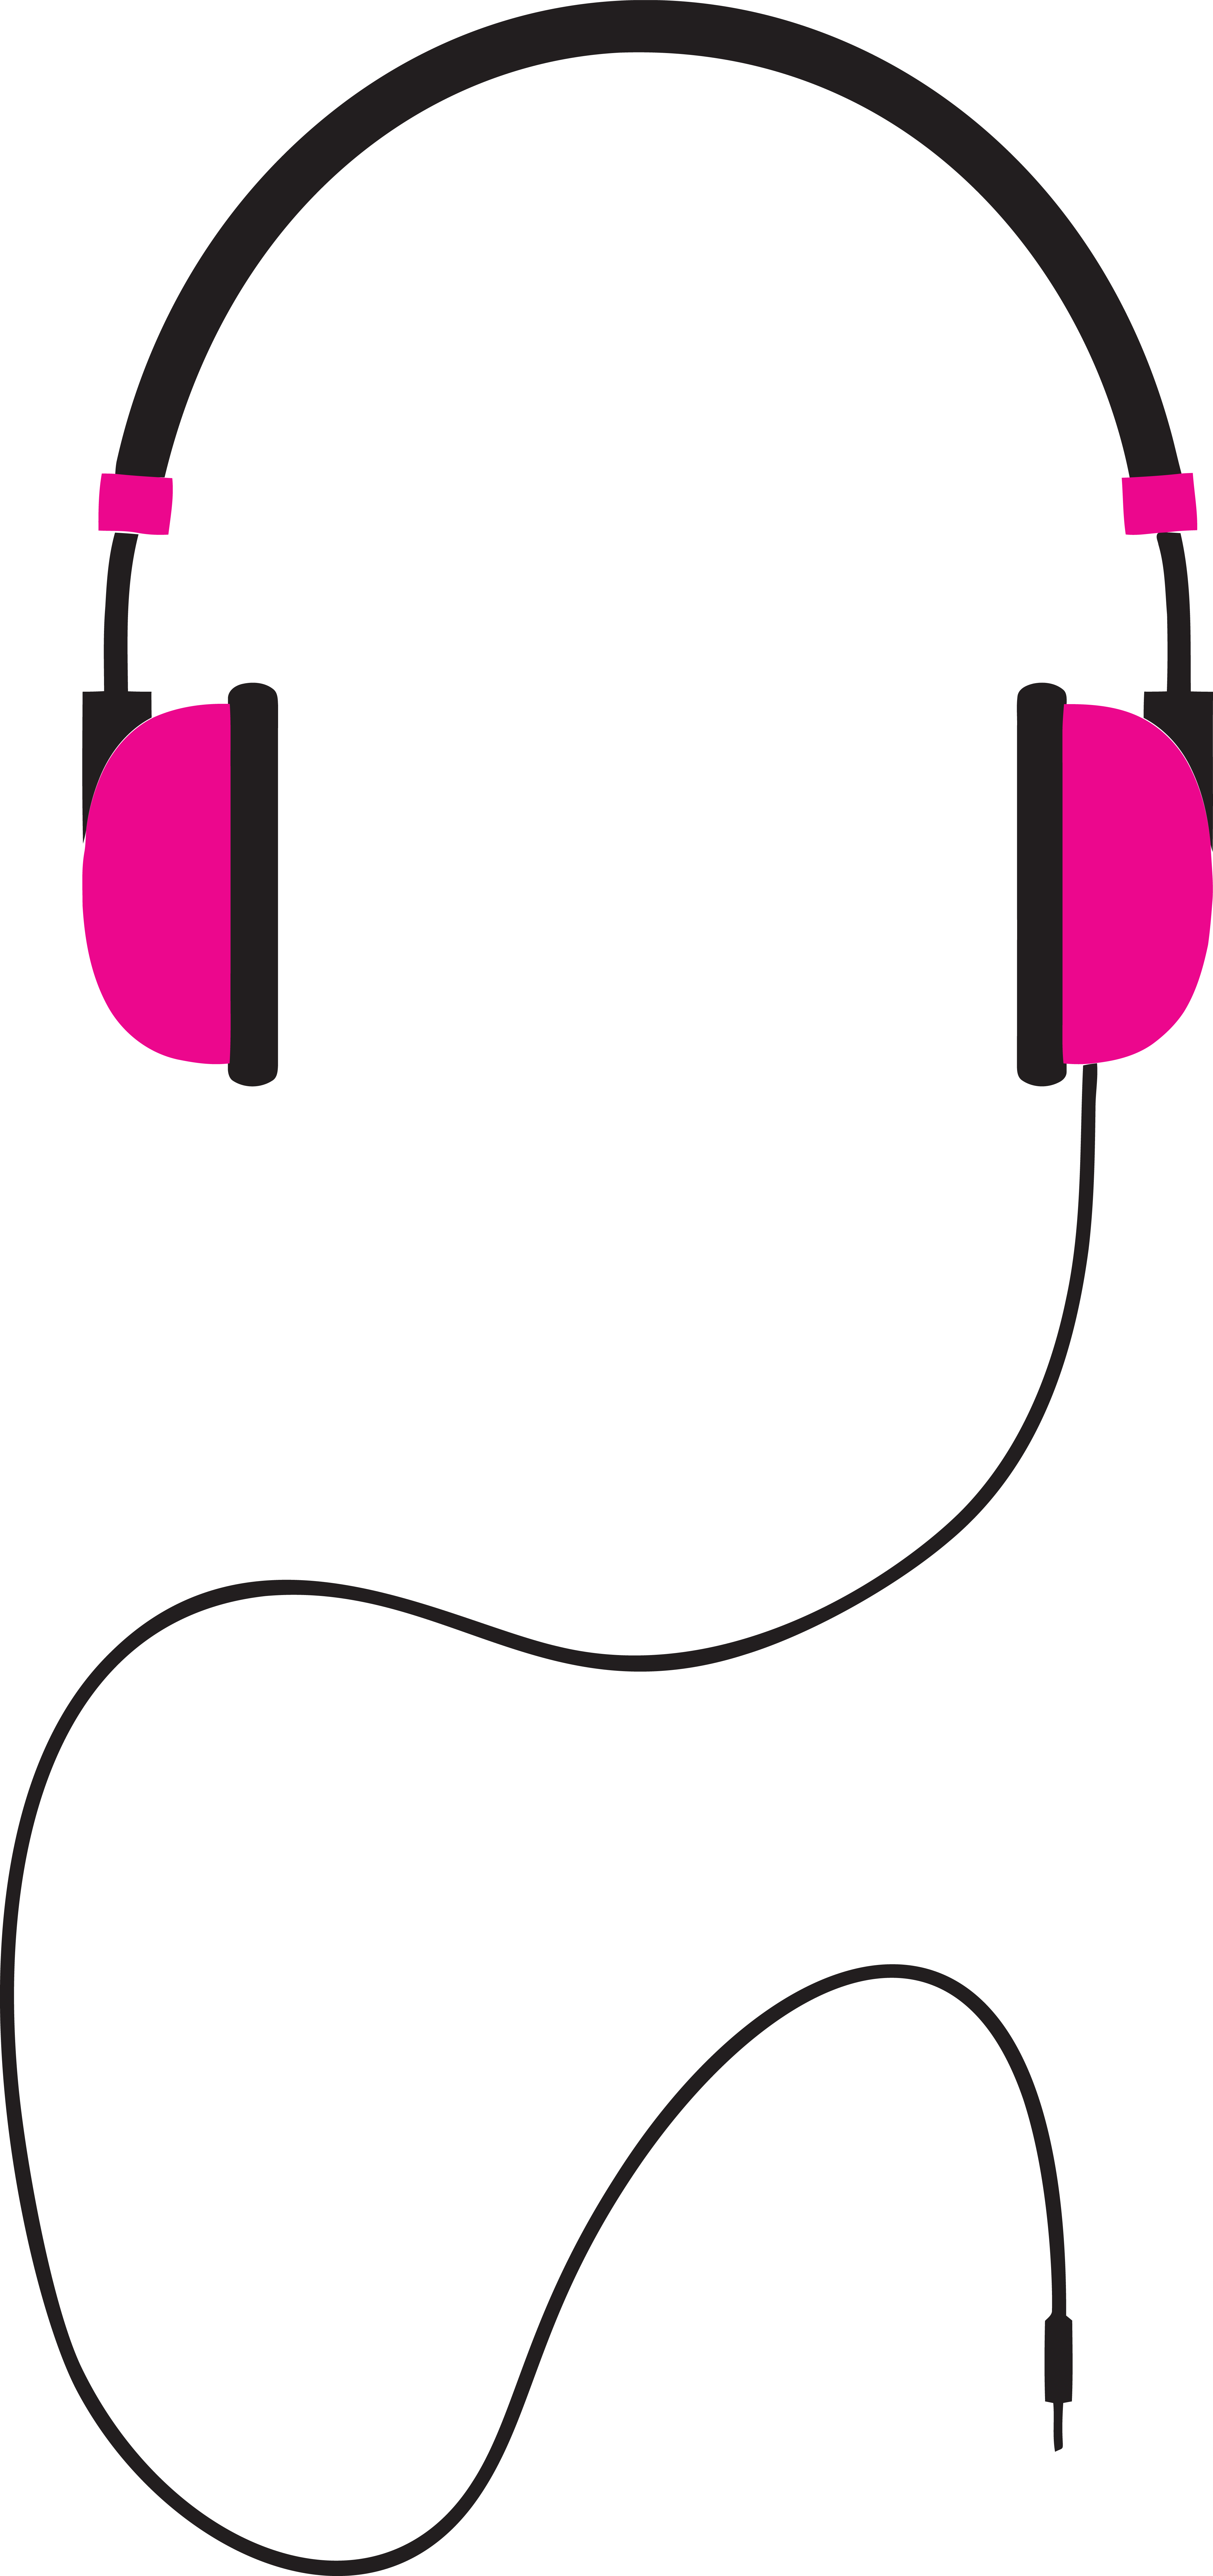 Free Clipart Of A pair of pink headphones #00012129 .